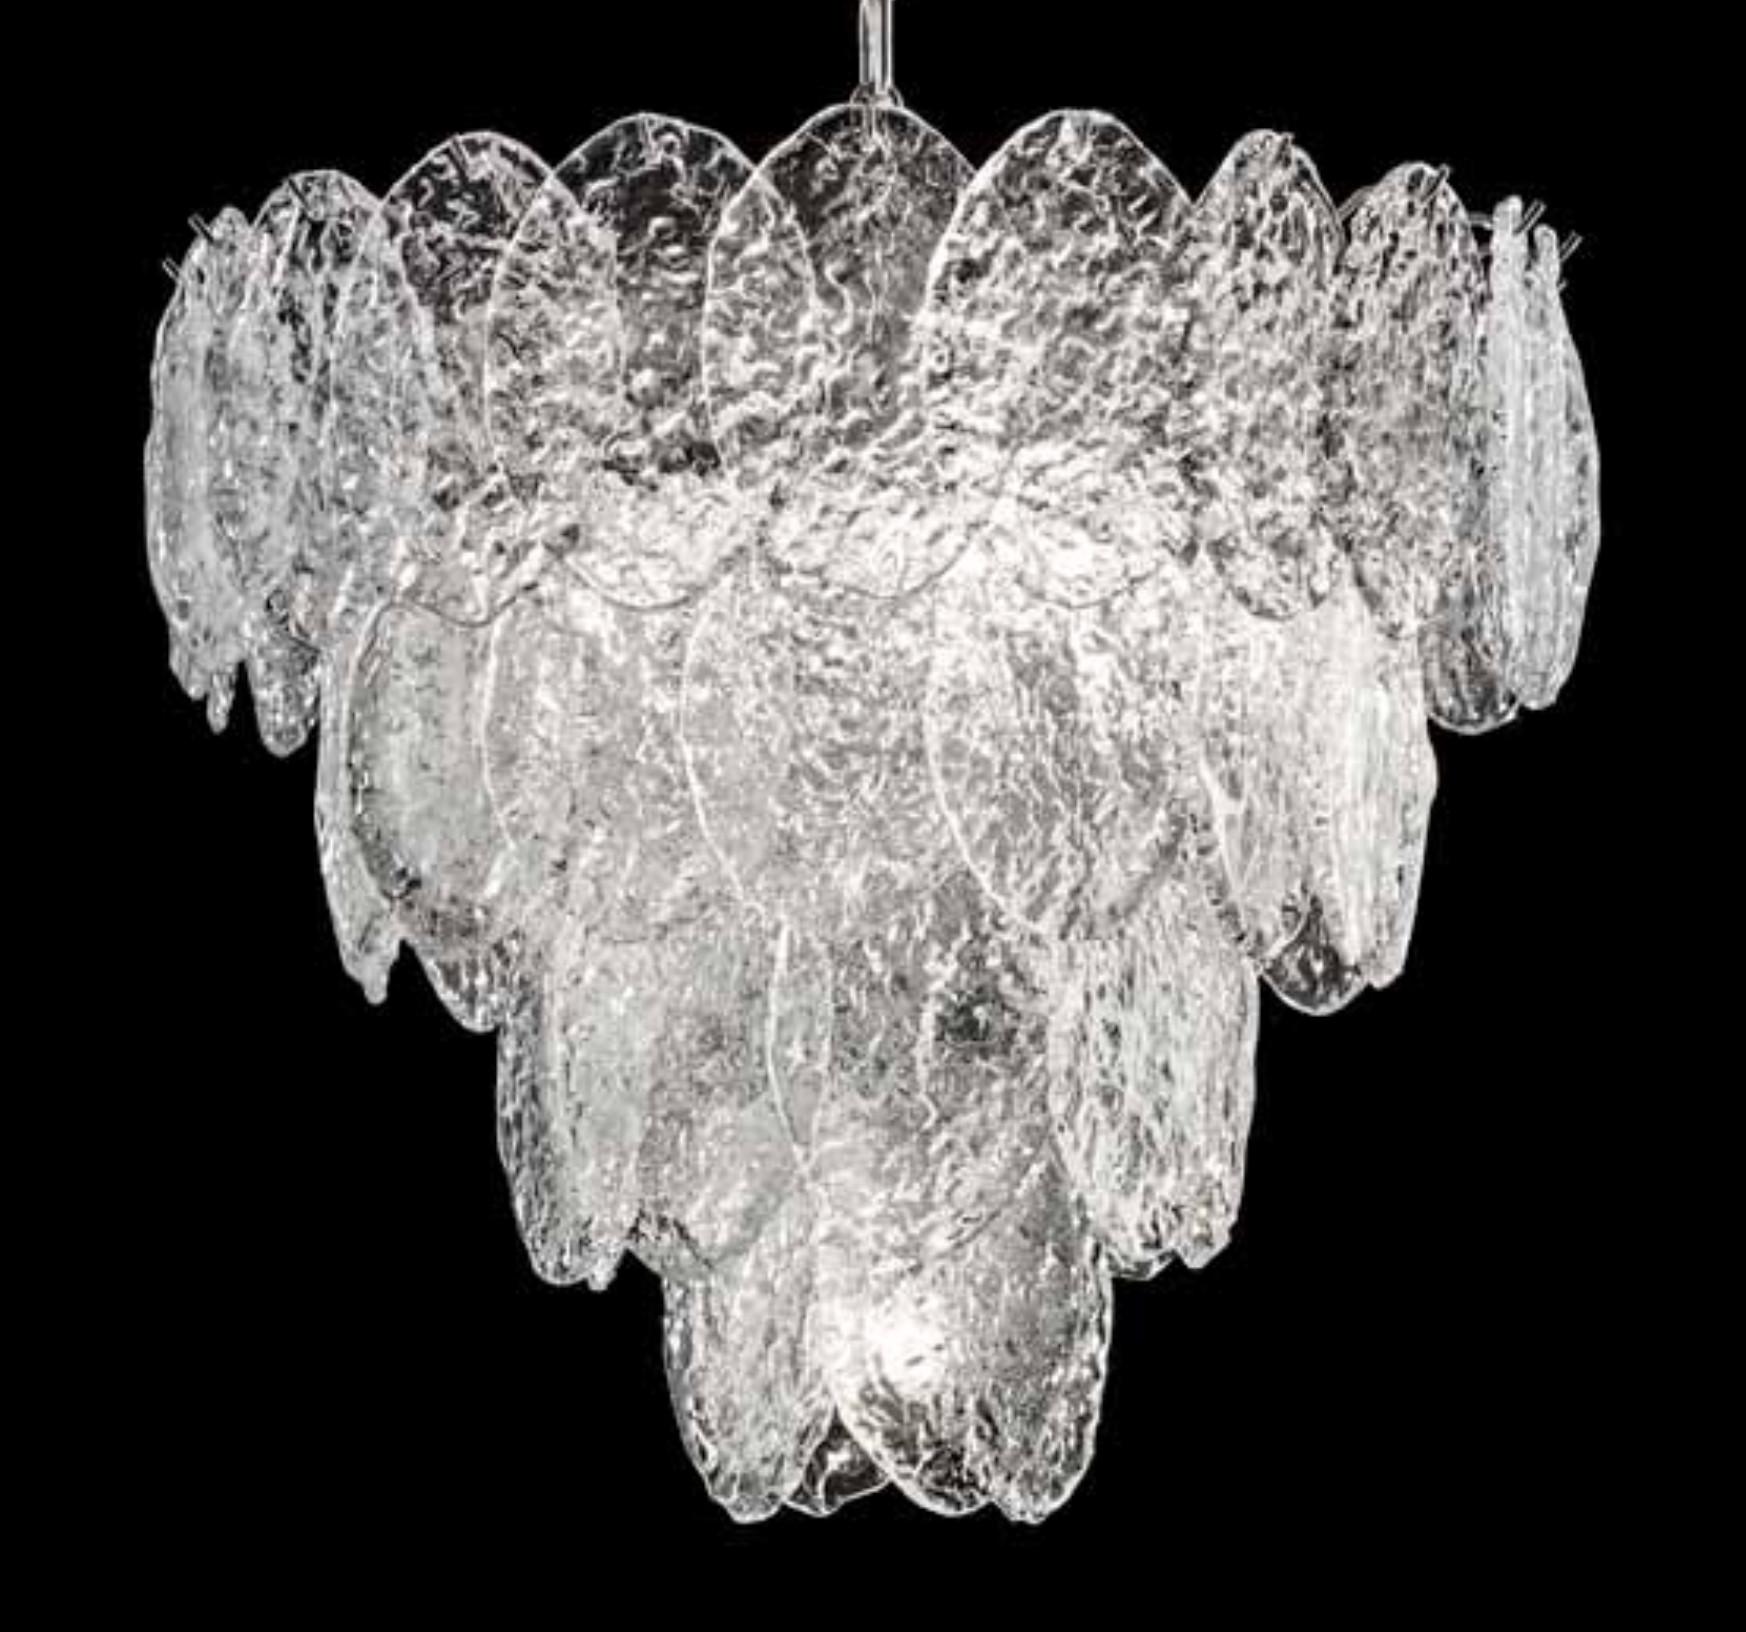 Italian chandelier shown with clear Murano oval discs mounted on chrome finish frame, inspired by Mazzega / Made in Italy
Measures: Diameter 21.5 inches / height 18 inches plus chain and canopy
4 lights / E26 or E27 type / max 60W each
Order only /